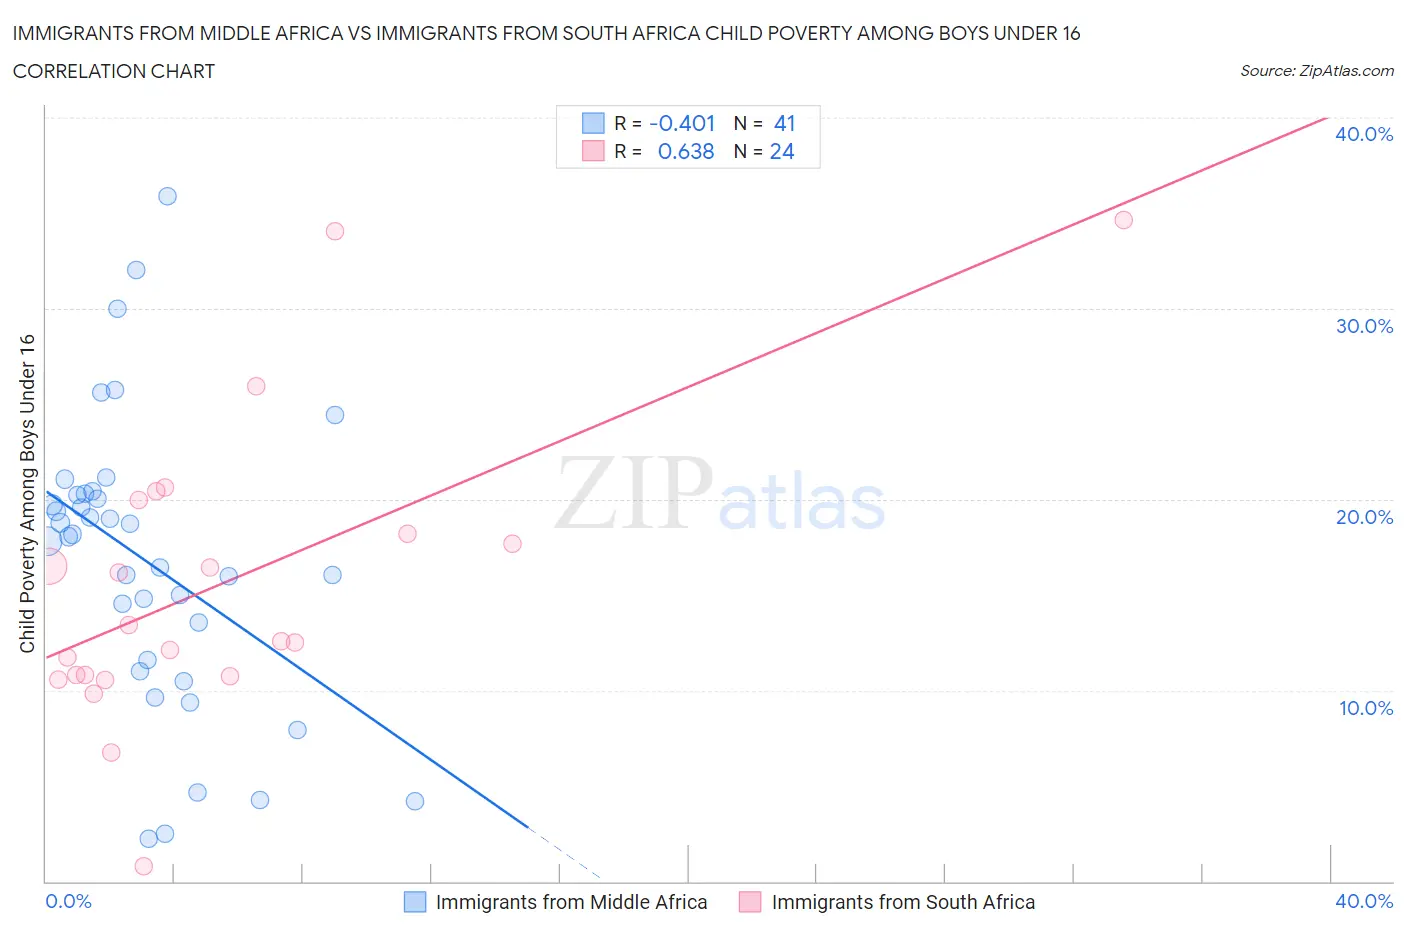 Immigrants from Middle Africa vs Immigrants from South Africa Child Poverty Among Boys Under 16